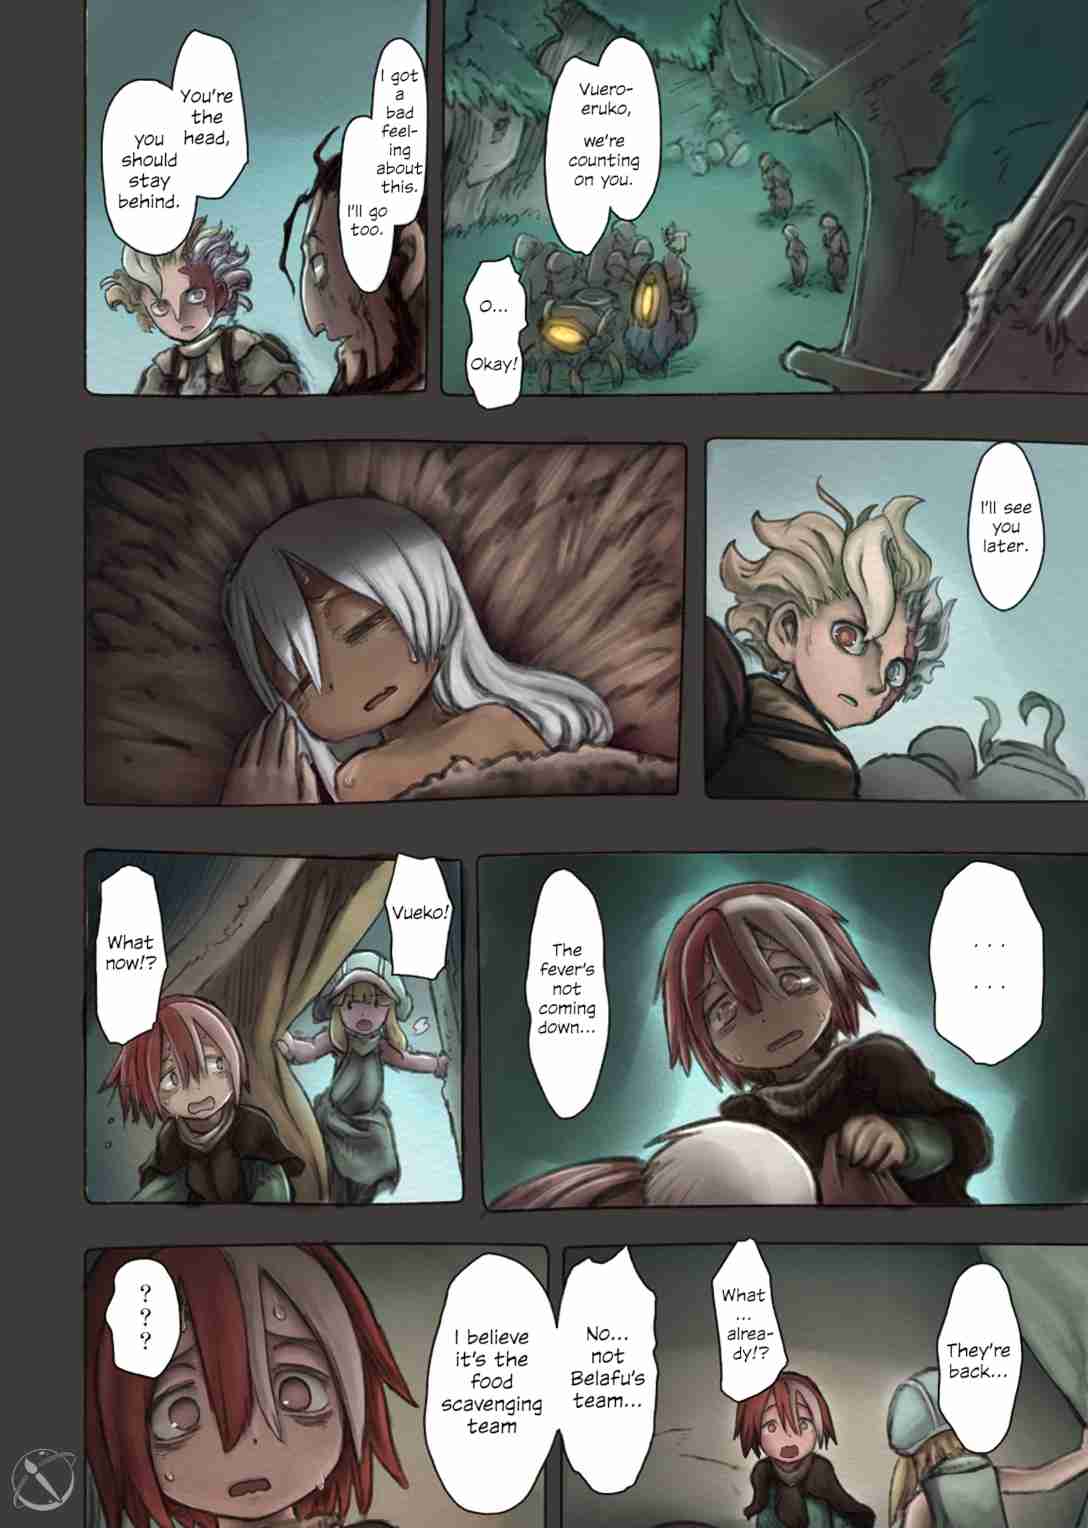 Made in Abyss (fan colored) Vol. 8 Ch. 49 The Golden City [Colored]